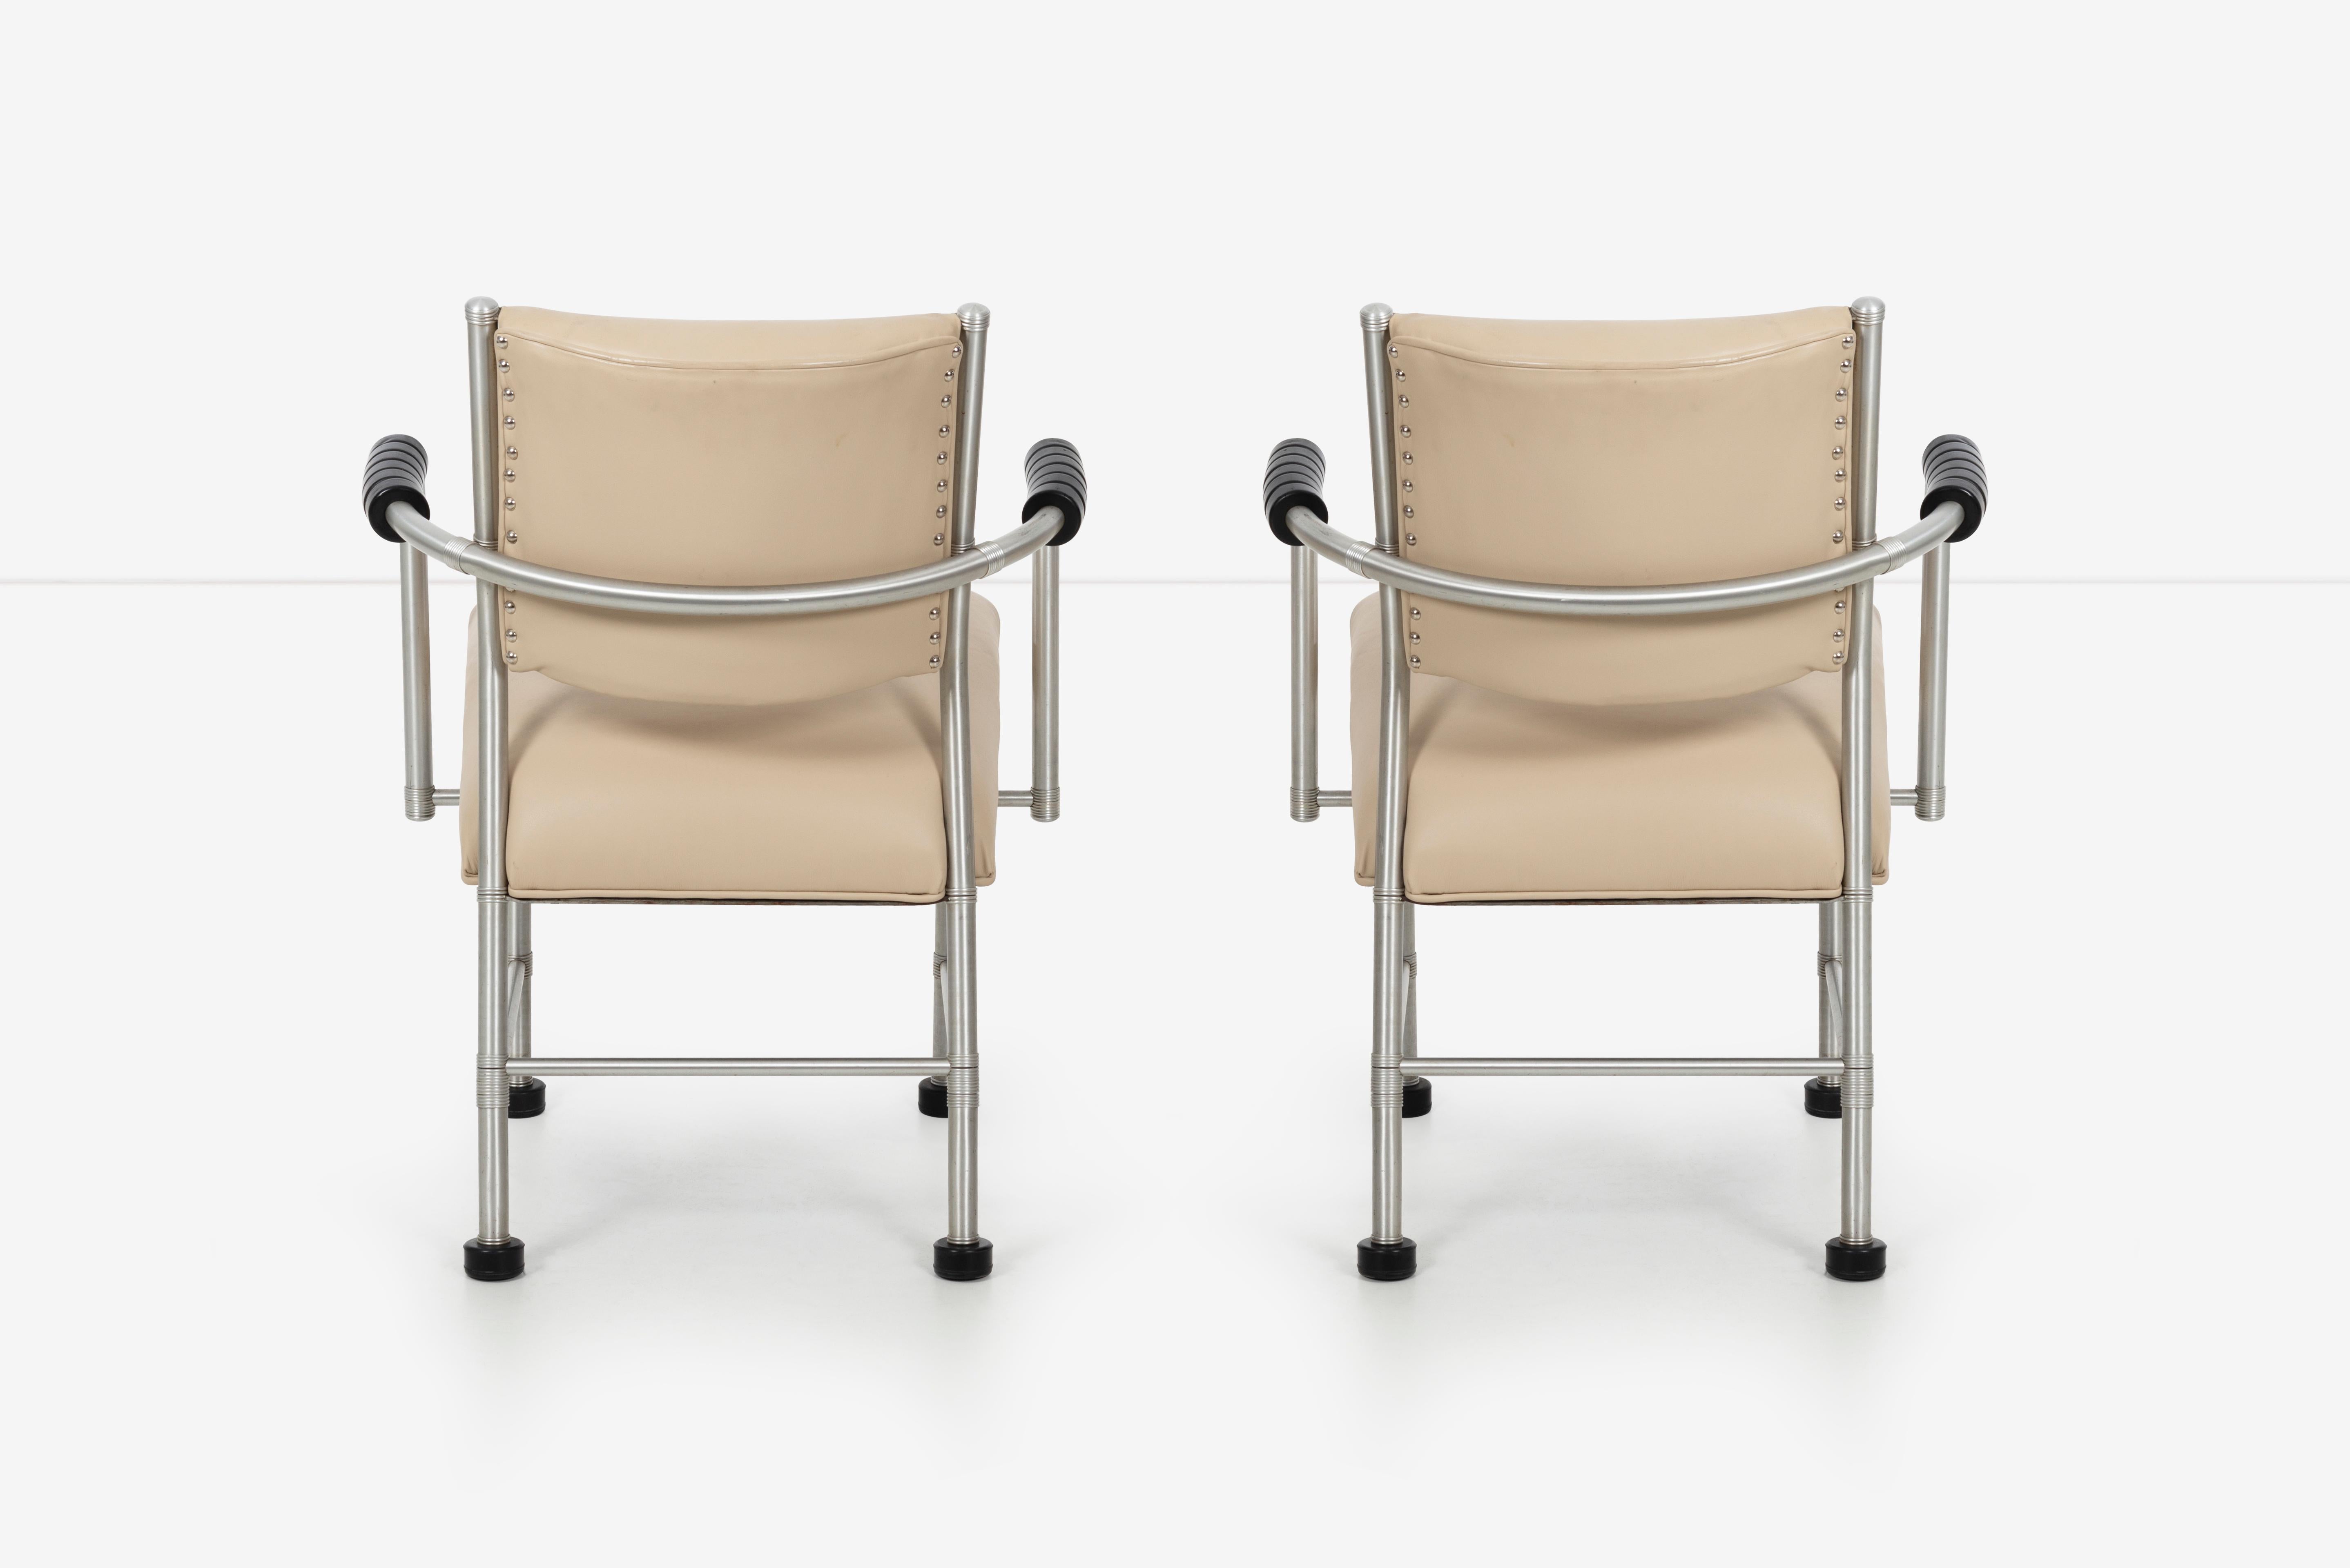 Aluminum Warren McArthur Pair of Chairs a Revision of The Sardi's Chair For Sale